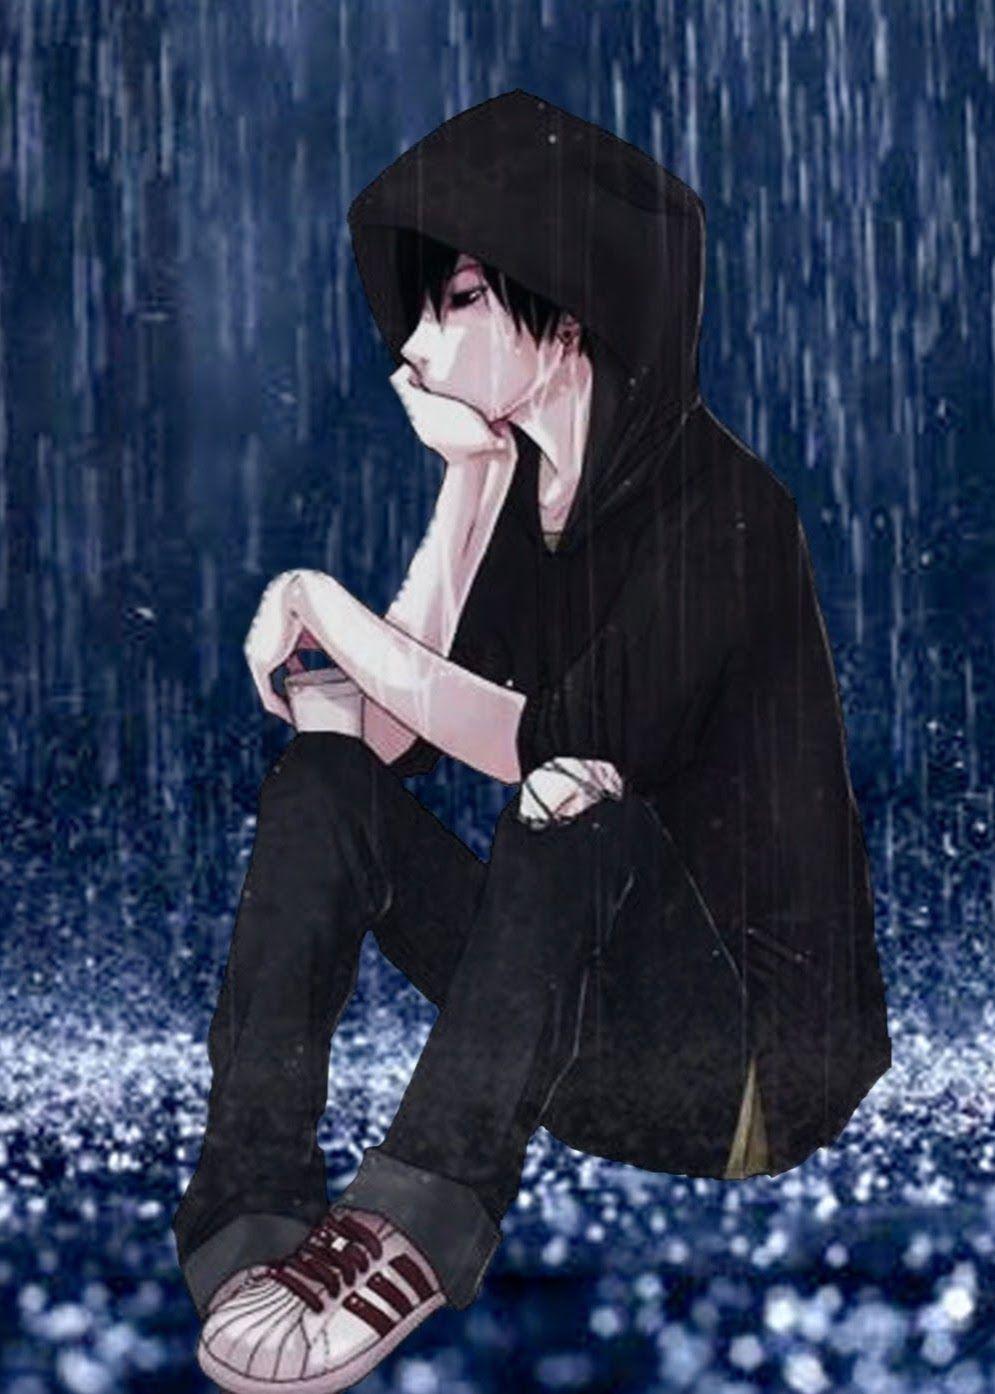 Image Result For Sad Anime Boy Crying In The Rain Alone